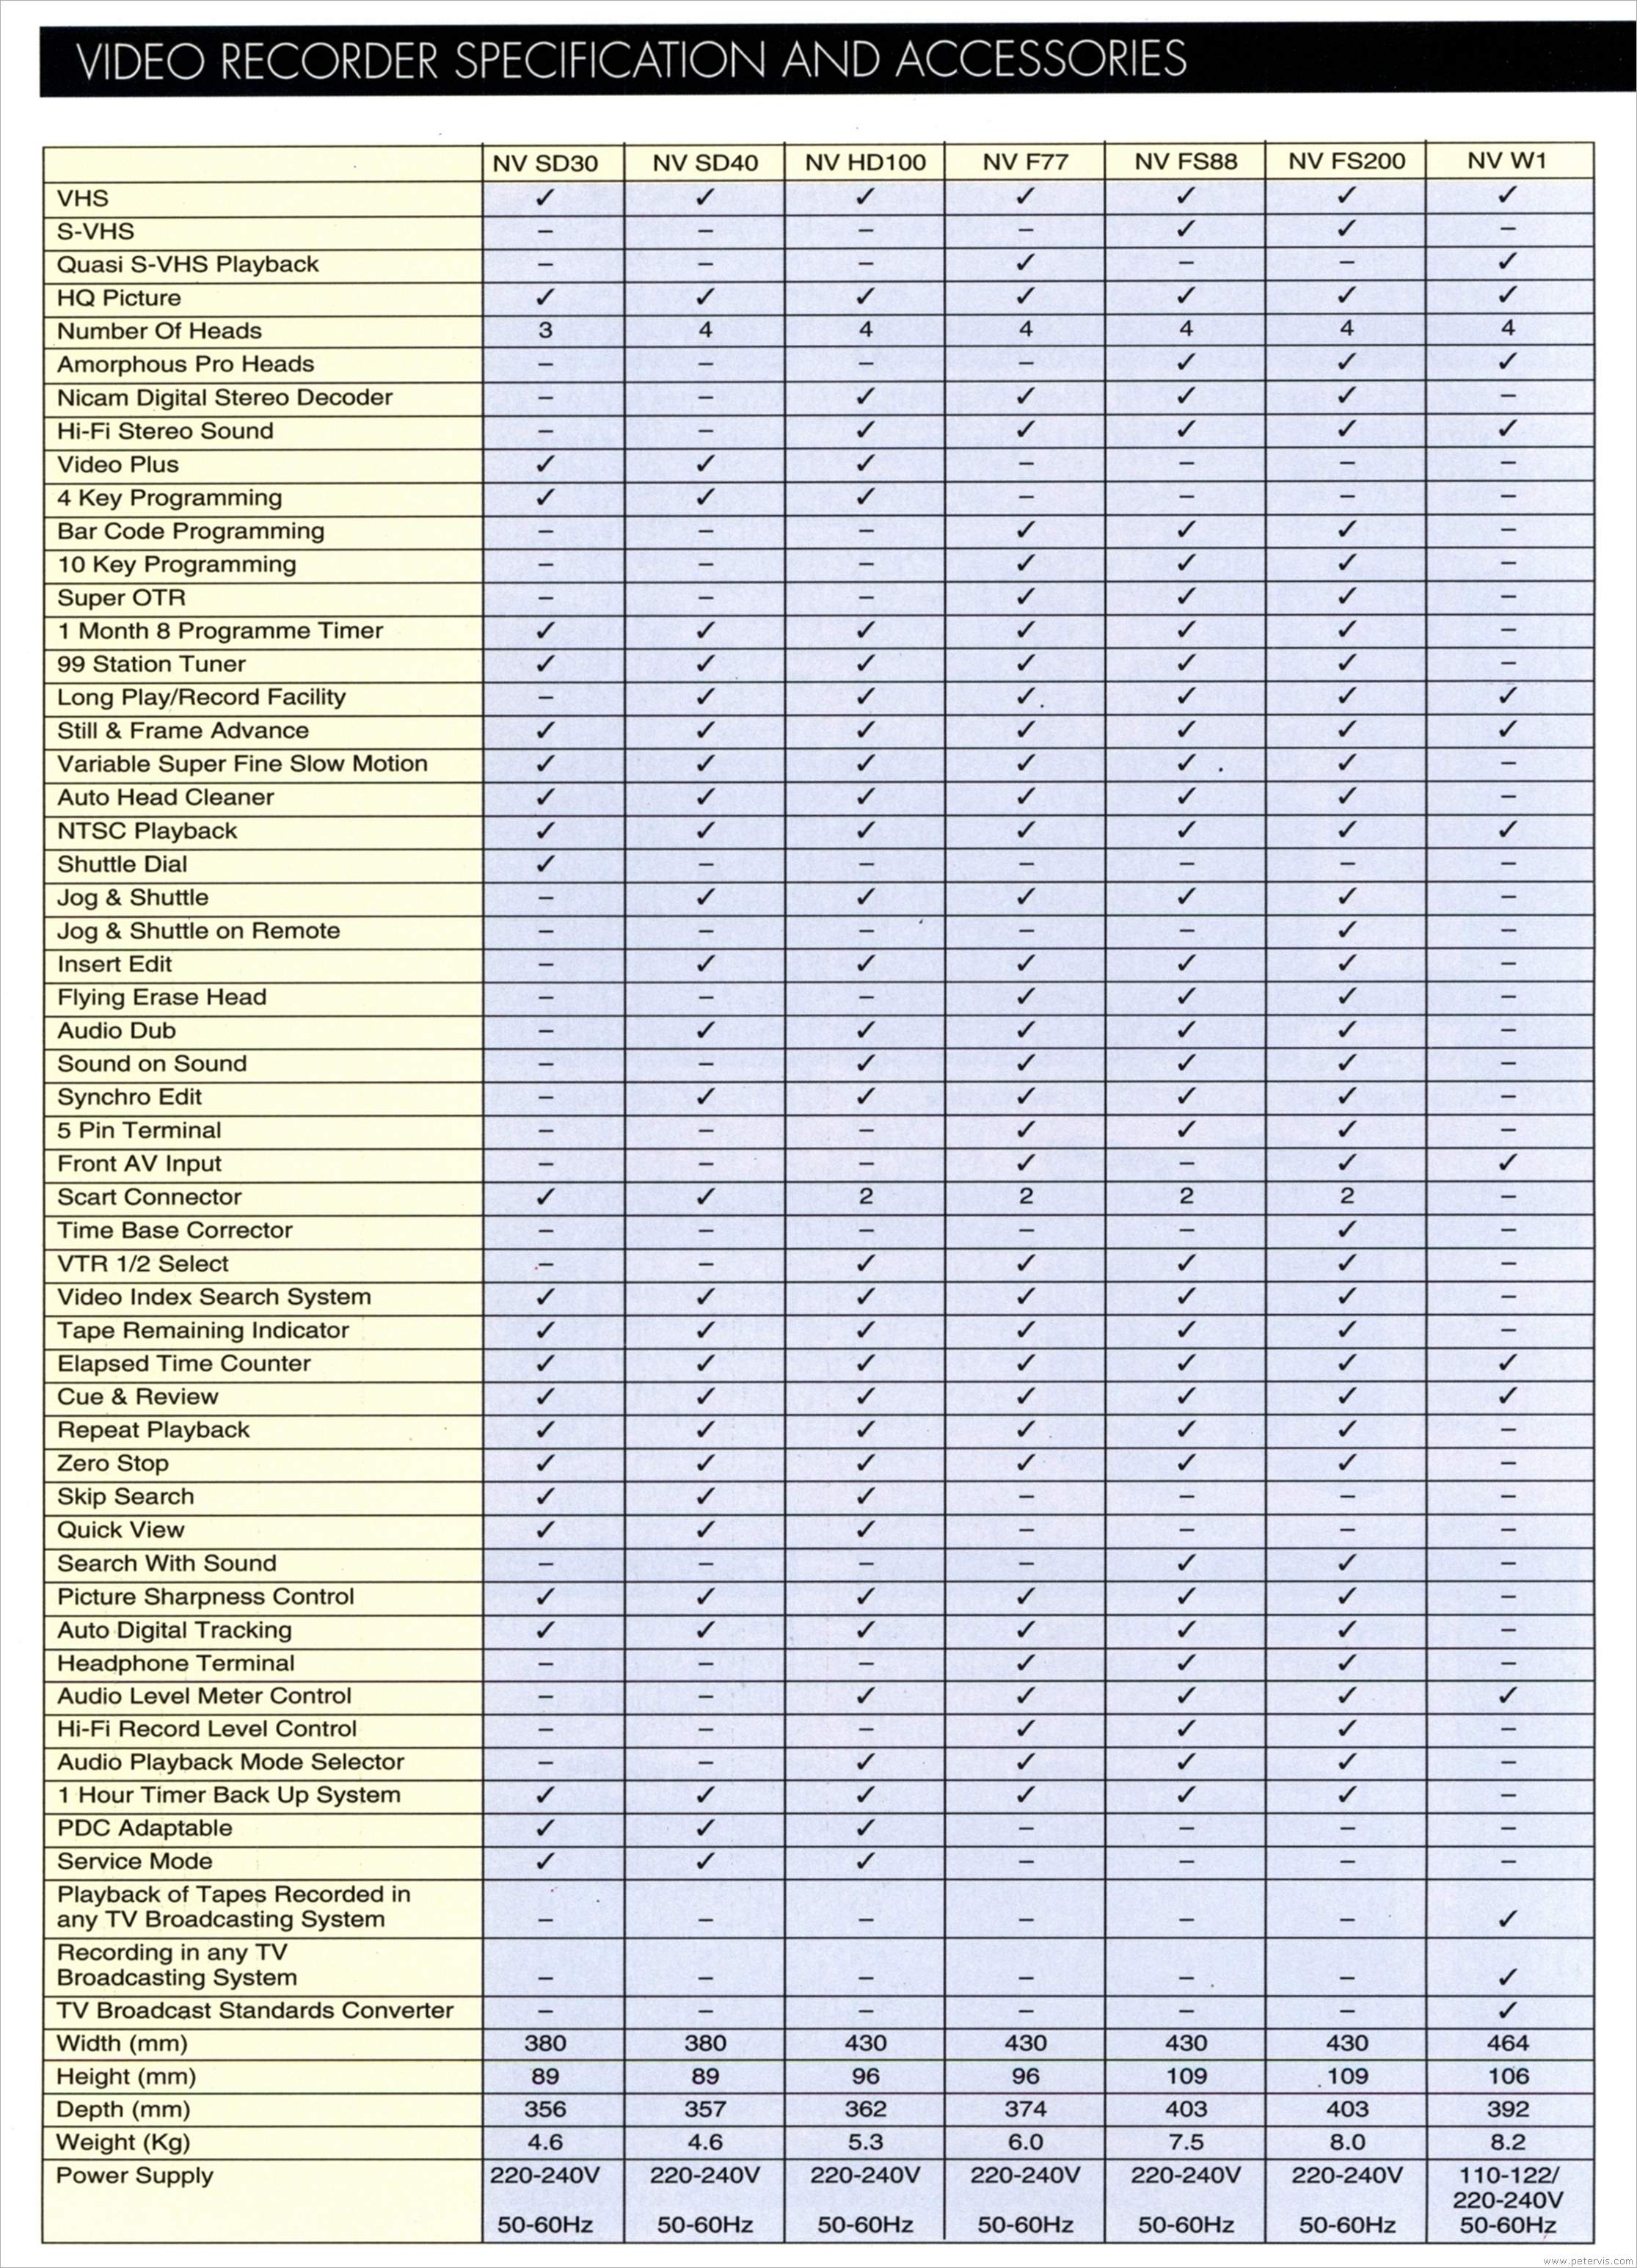 Video Recorder Specification Chart